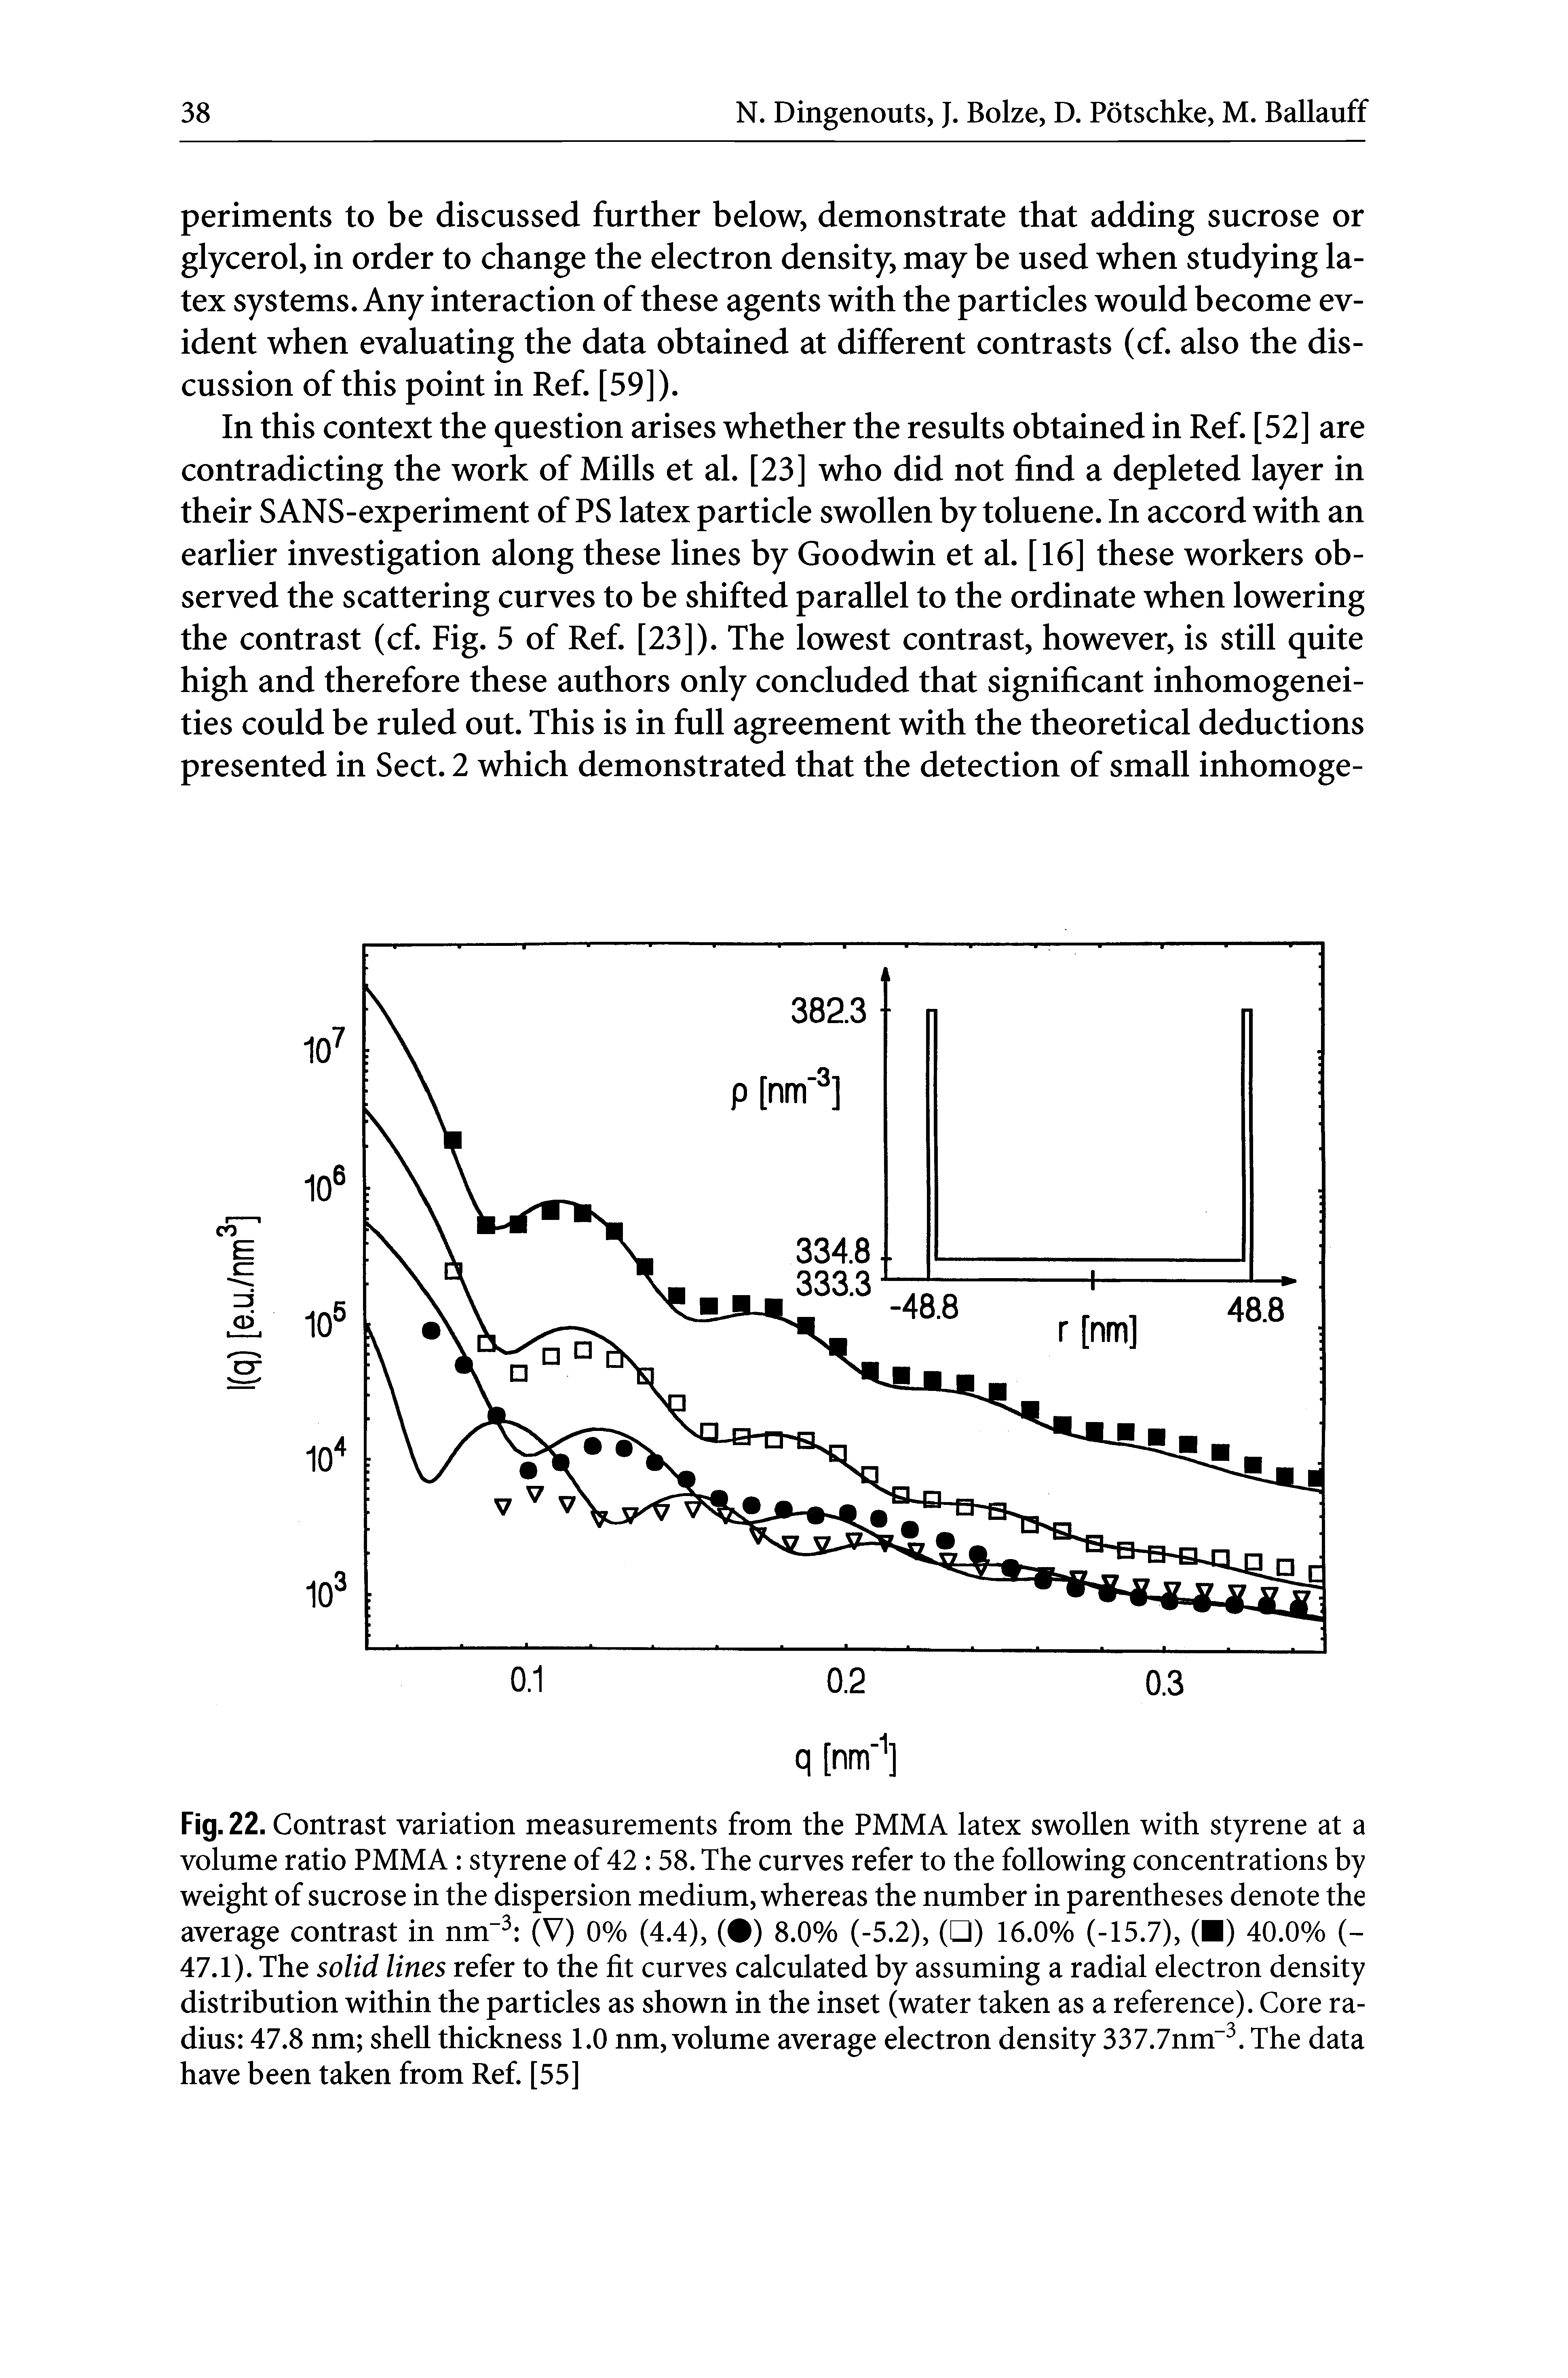 Fig. 22. Contrast variation measurements from the PMMA latex swollen with styrene at a volume ratio PMMA styrene of 42 58. The curves refer to the following concentrations by weight of sucrose in the dispersion medium, whereas the number in parentheses denote the average contrast in nm" (V) 0% (4.4), ( ) 8.0% (-5.2), ( ) 16.0% (-15.7), ( ) 40.0% (-47.1). The solid lines refer to the fit curves calculated by assuming a radial electron density distribution within the particles as shown in the inset (water taken as a reference). Core radius 47.8 nm shell thickness 1.0 nm, volume average electron density 337.7nm . The data have been taken from Ref. [55]...